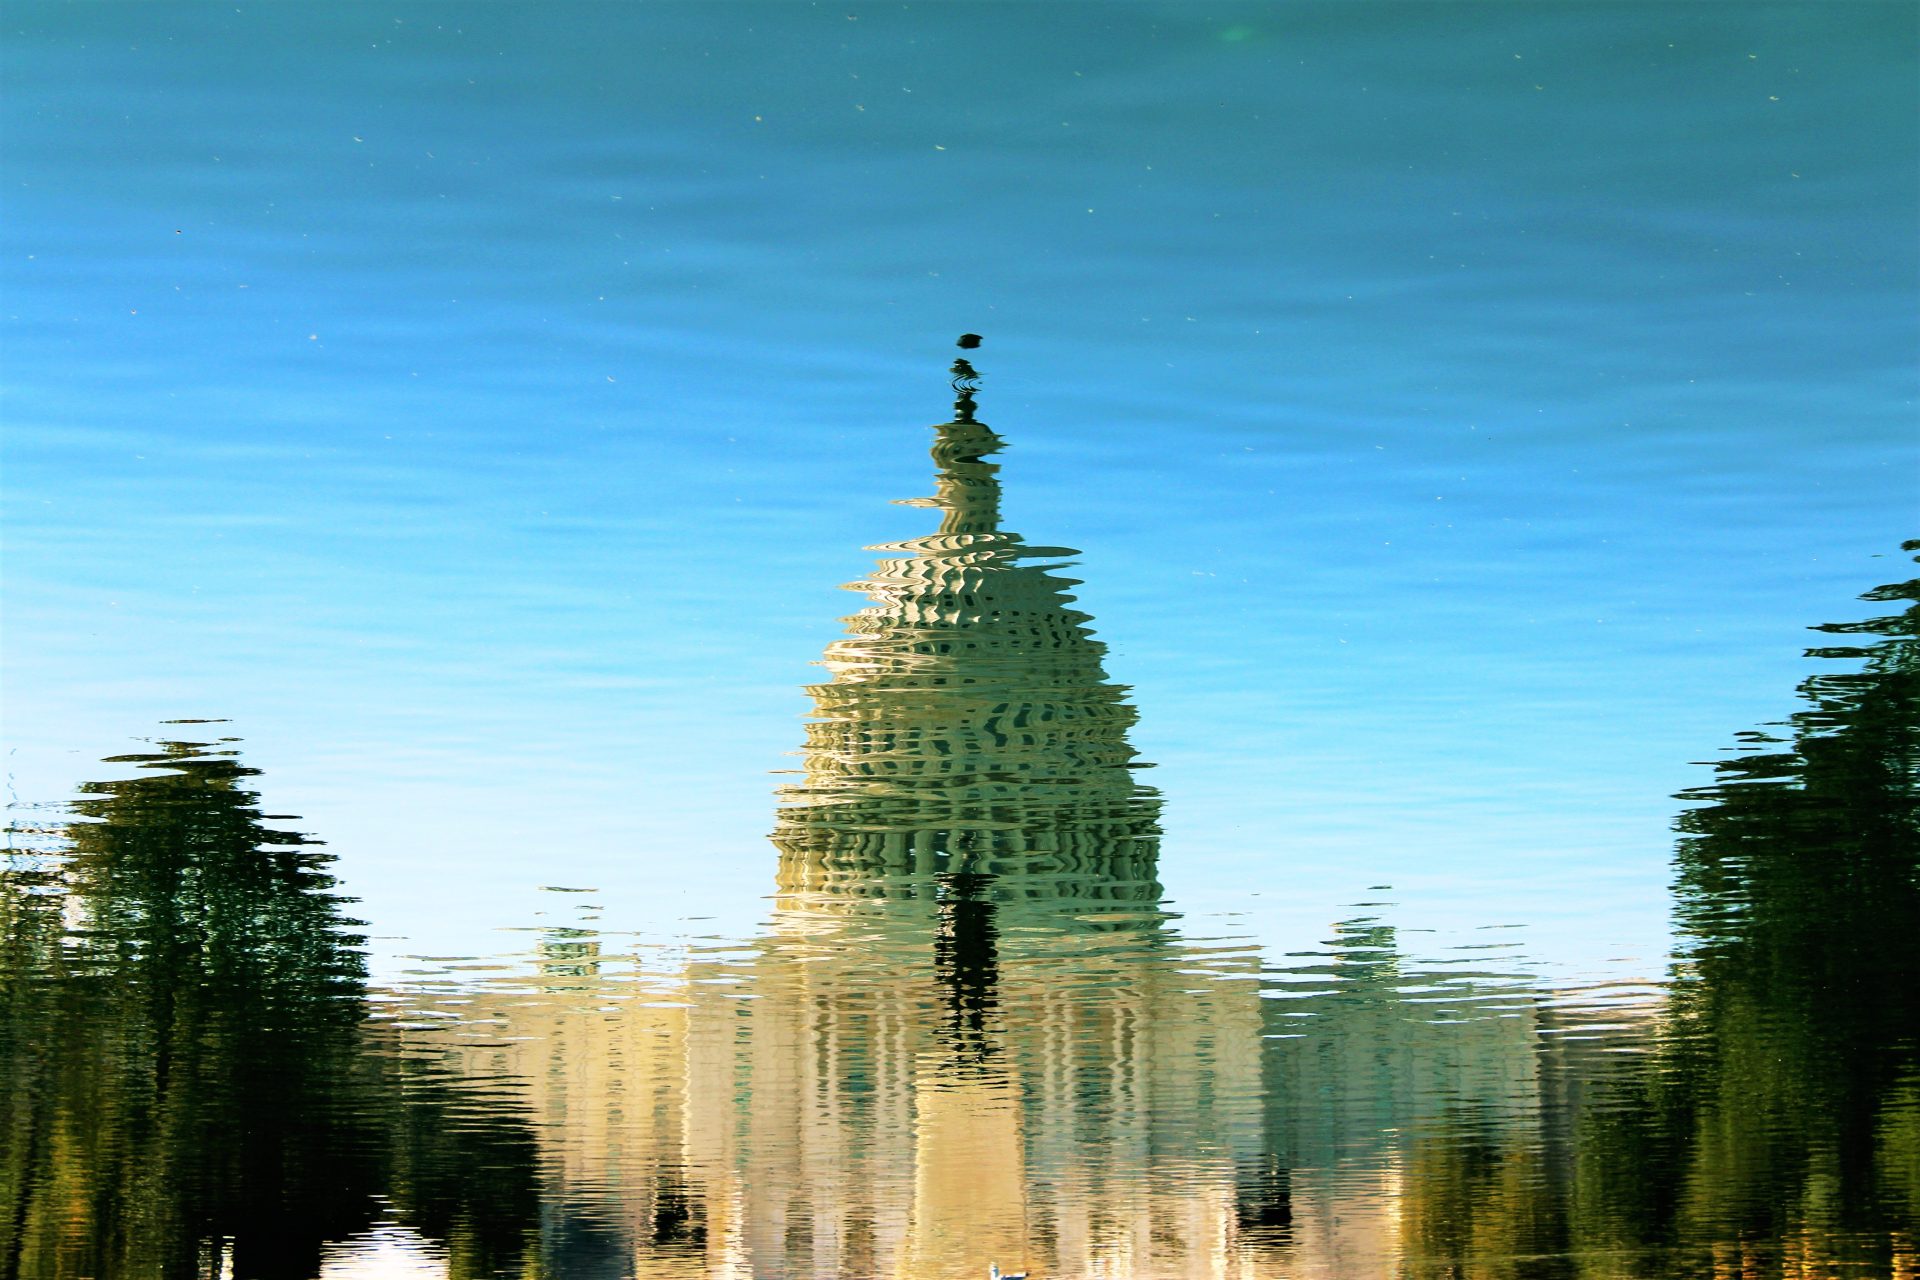 US Capitol building reflection in water